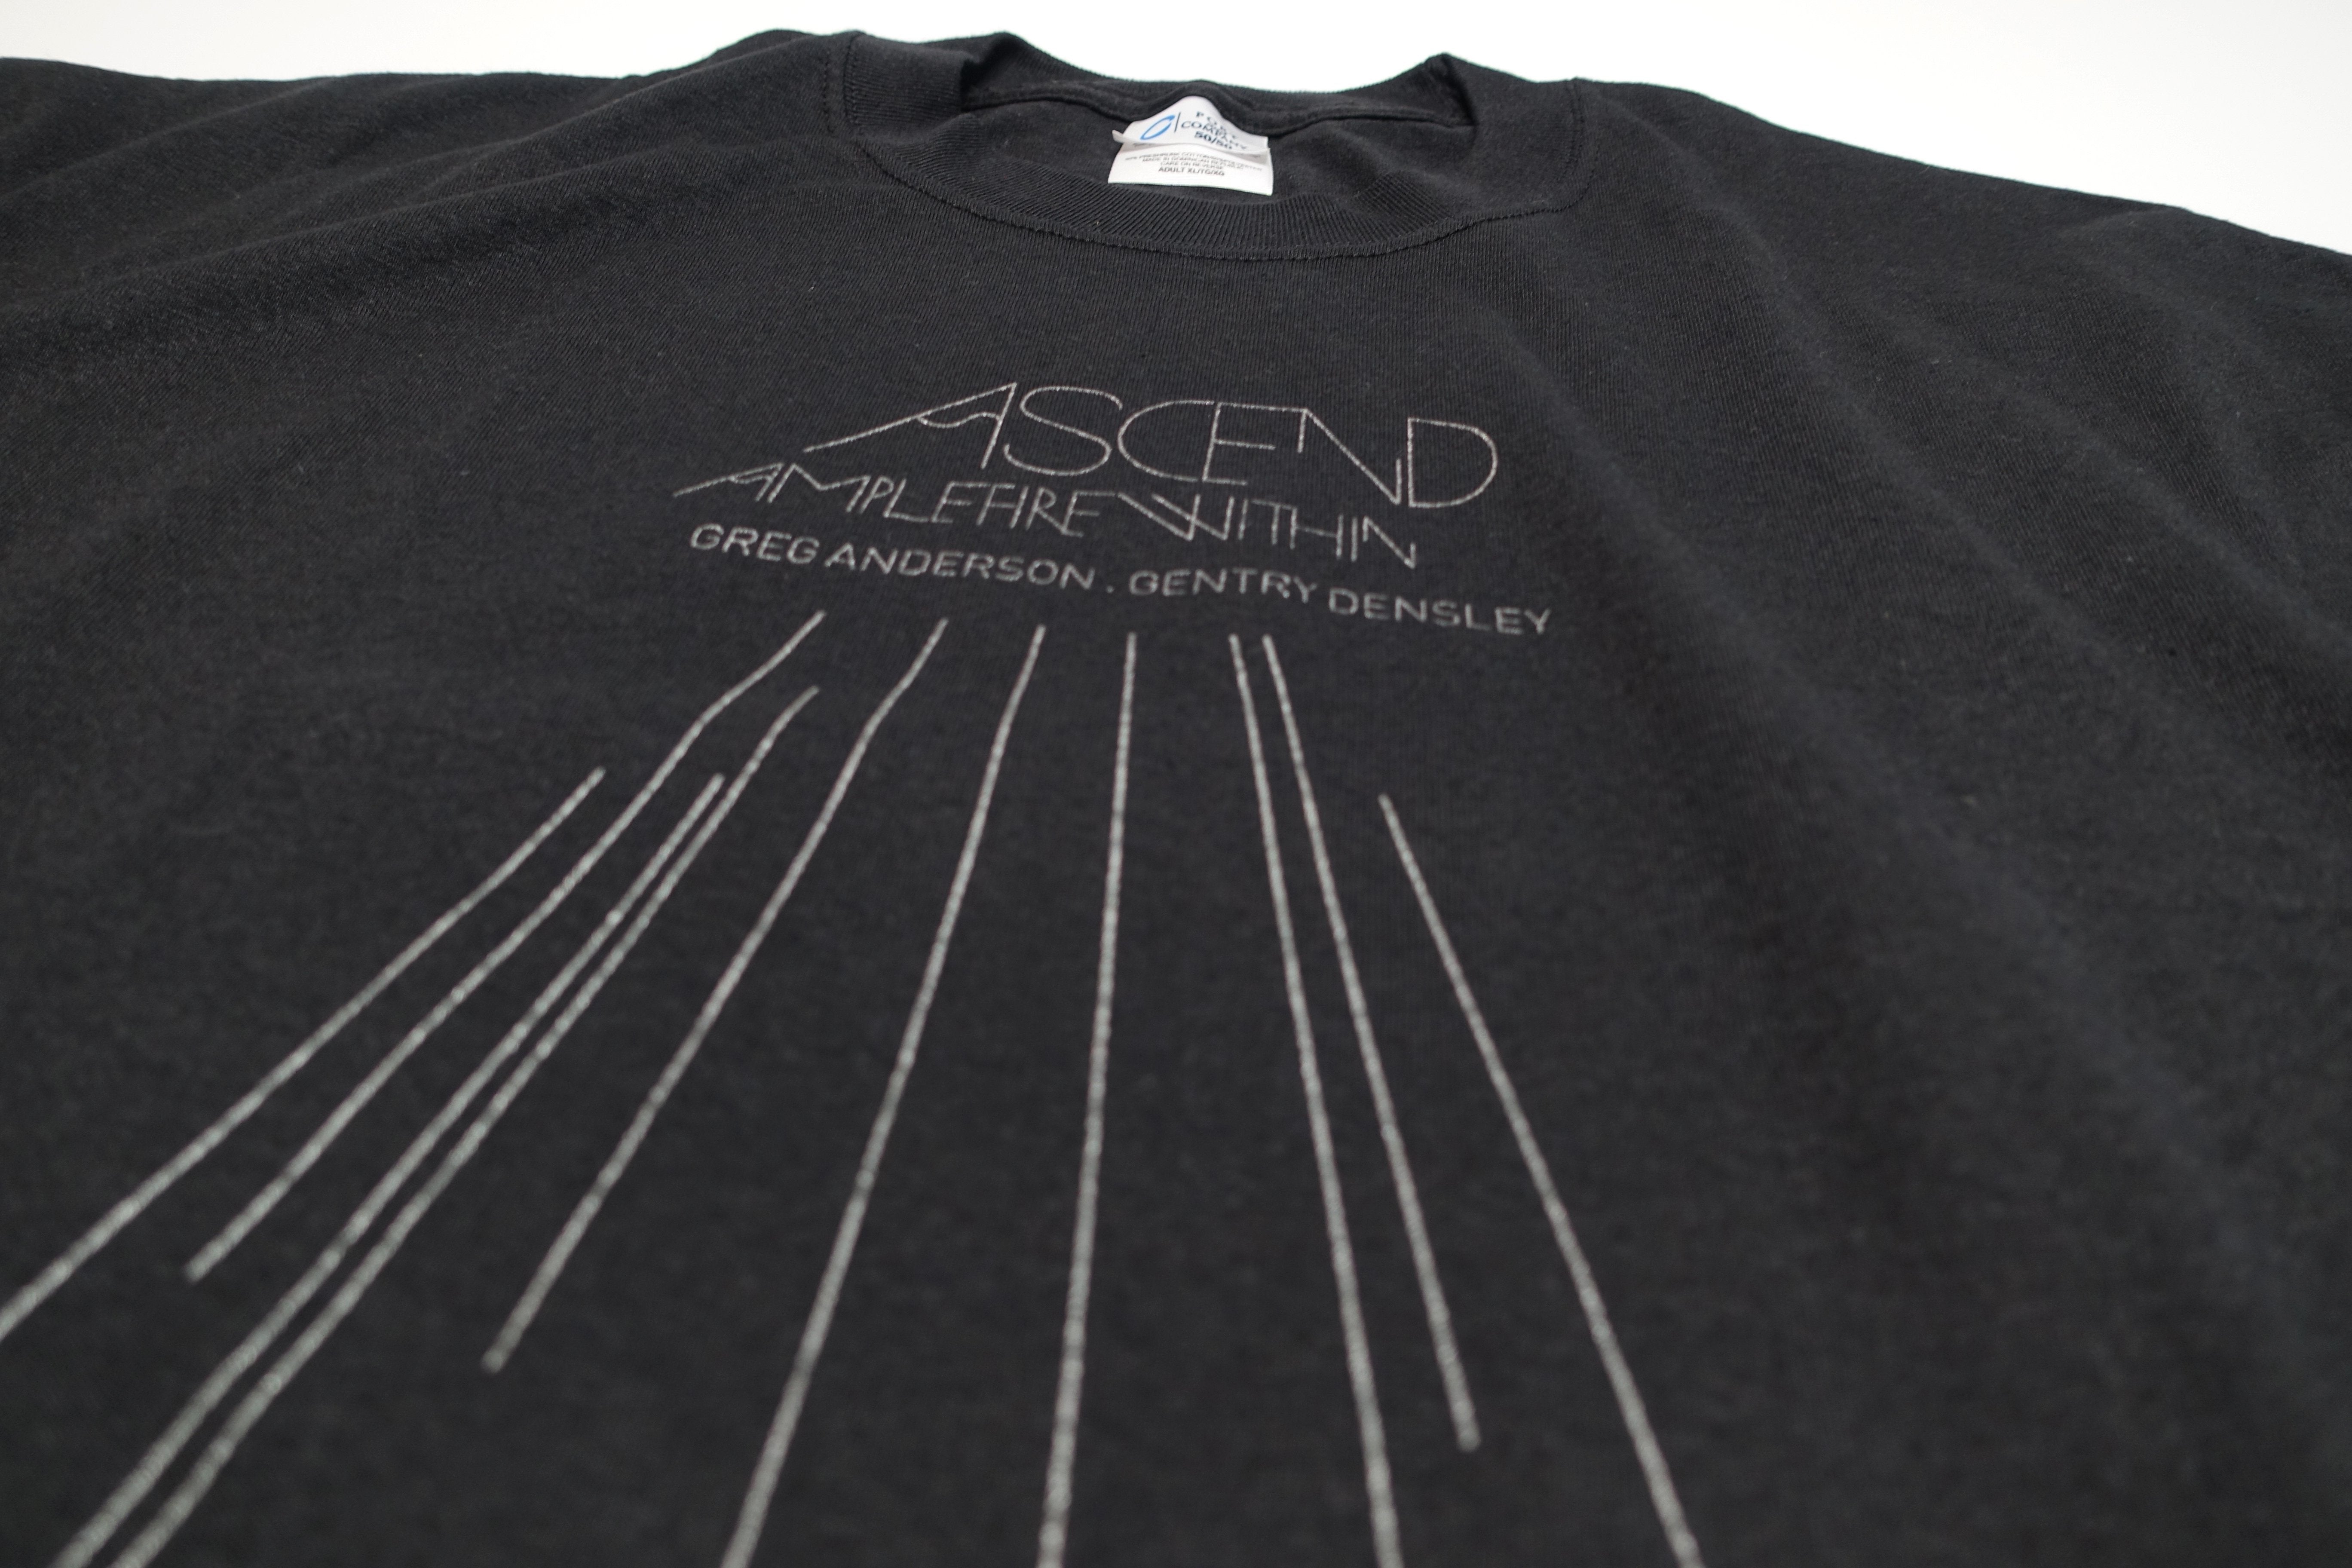 Ascend ‎– Ample Fire Within 2008 Tour Shirt Size XL